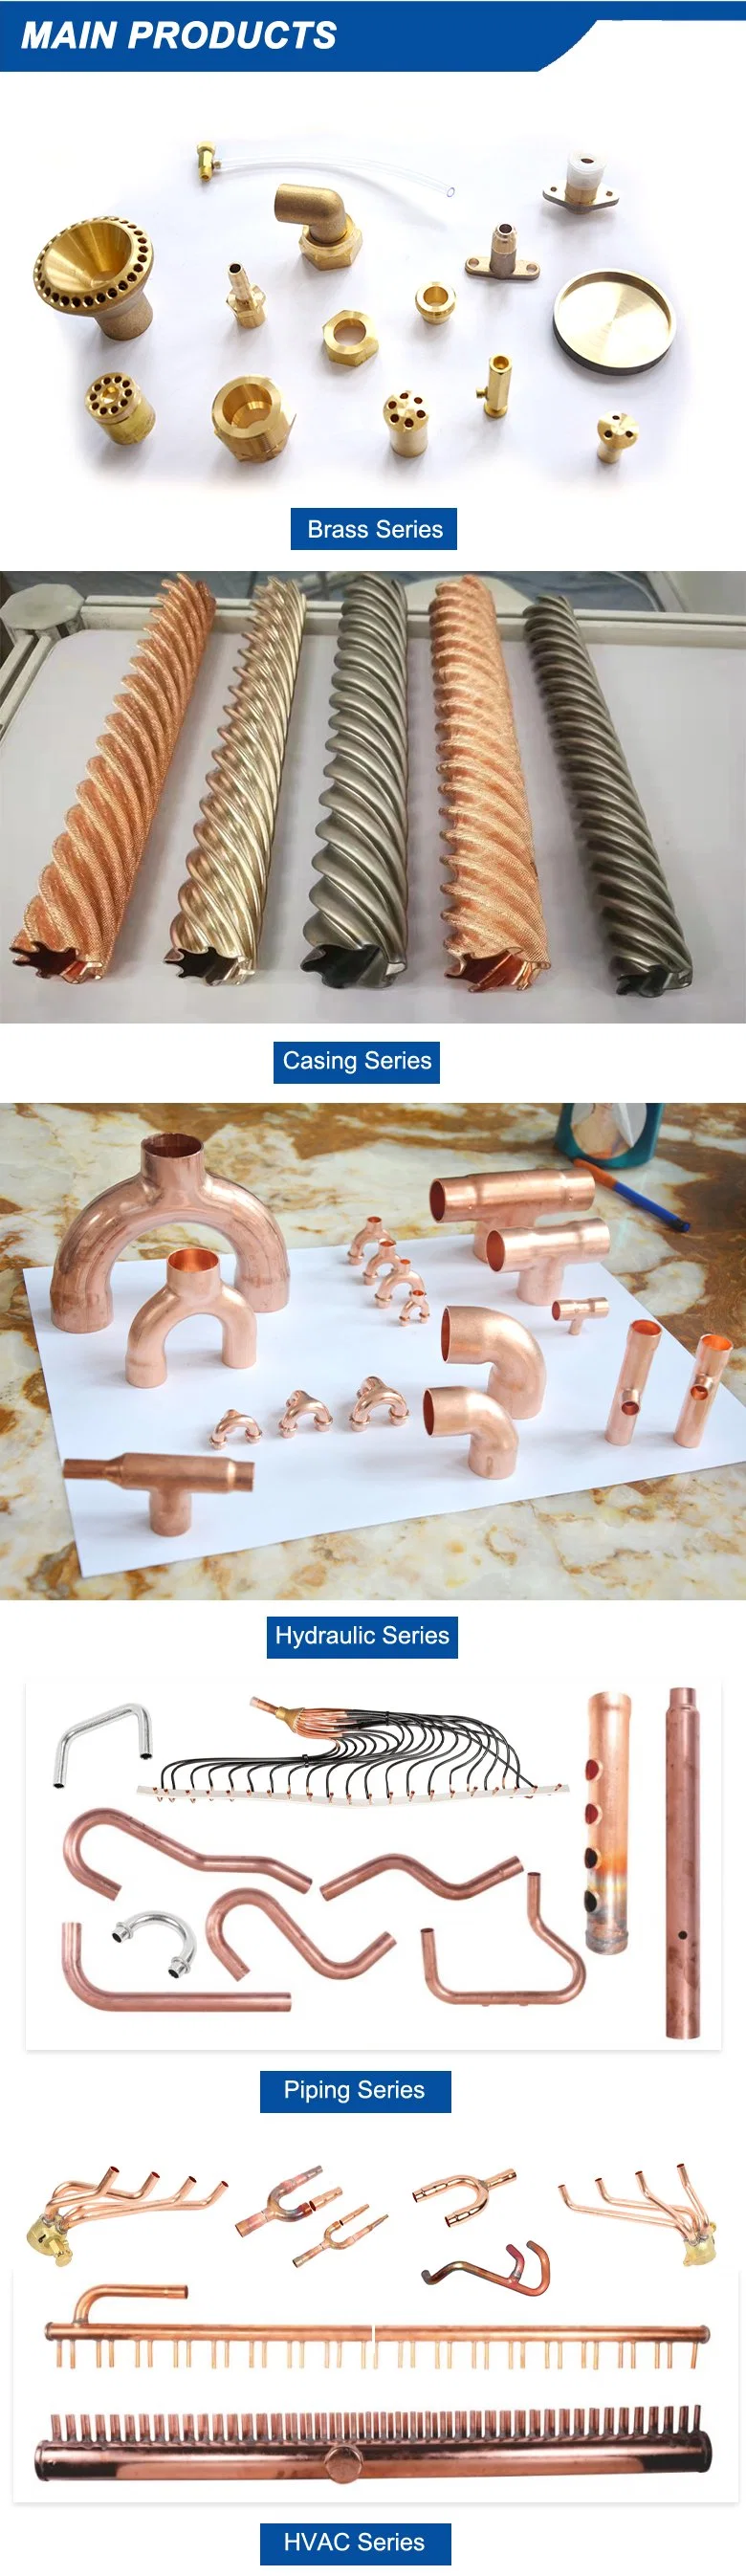 Three Way Copper Pipe Fittings Dispersed Pipes Air Conditioning Copper Pipe Fittings